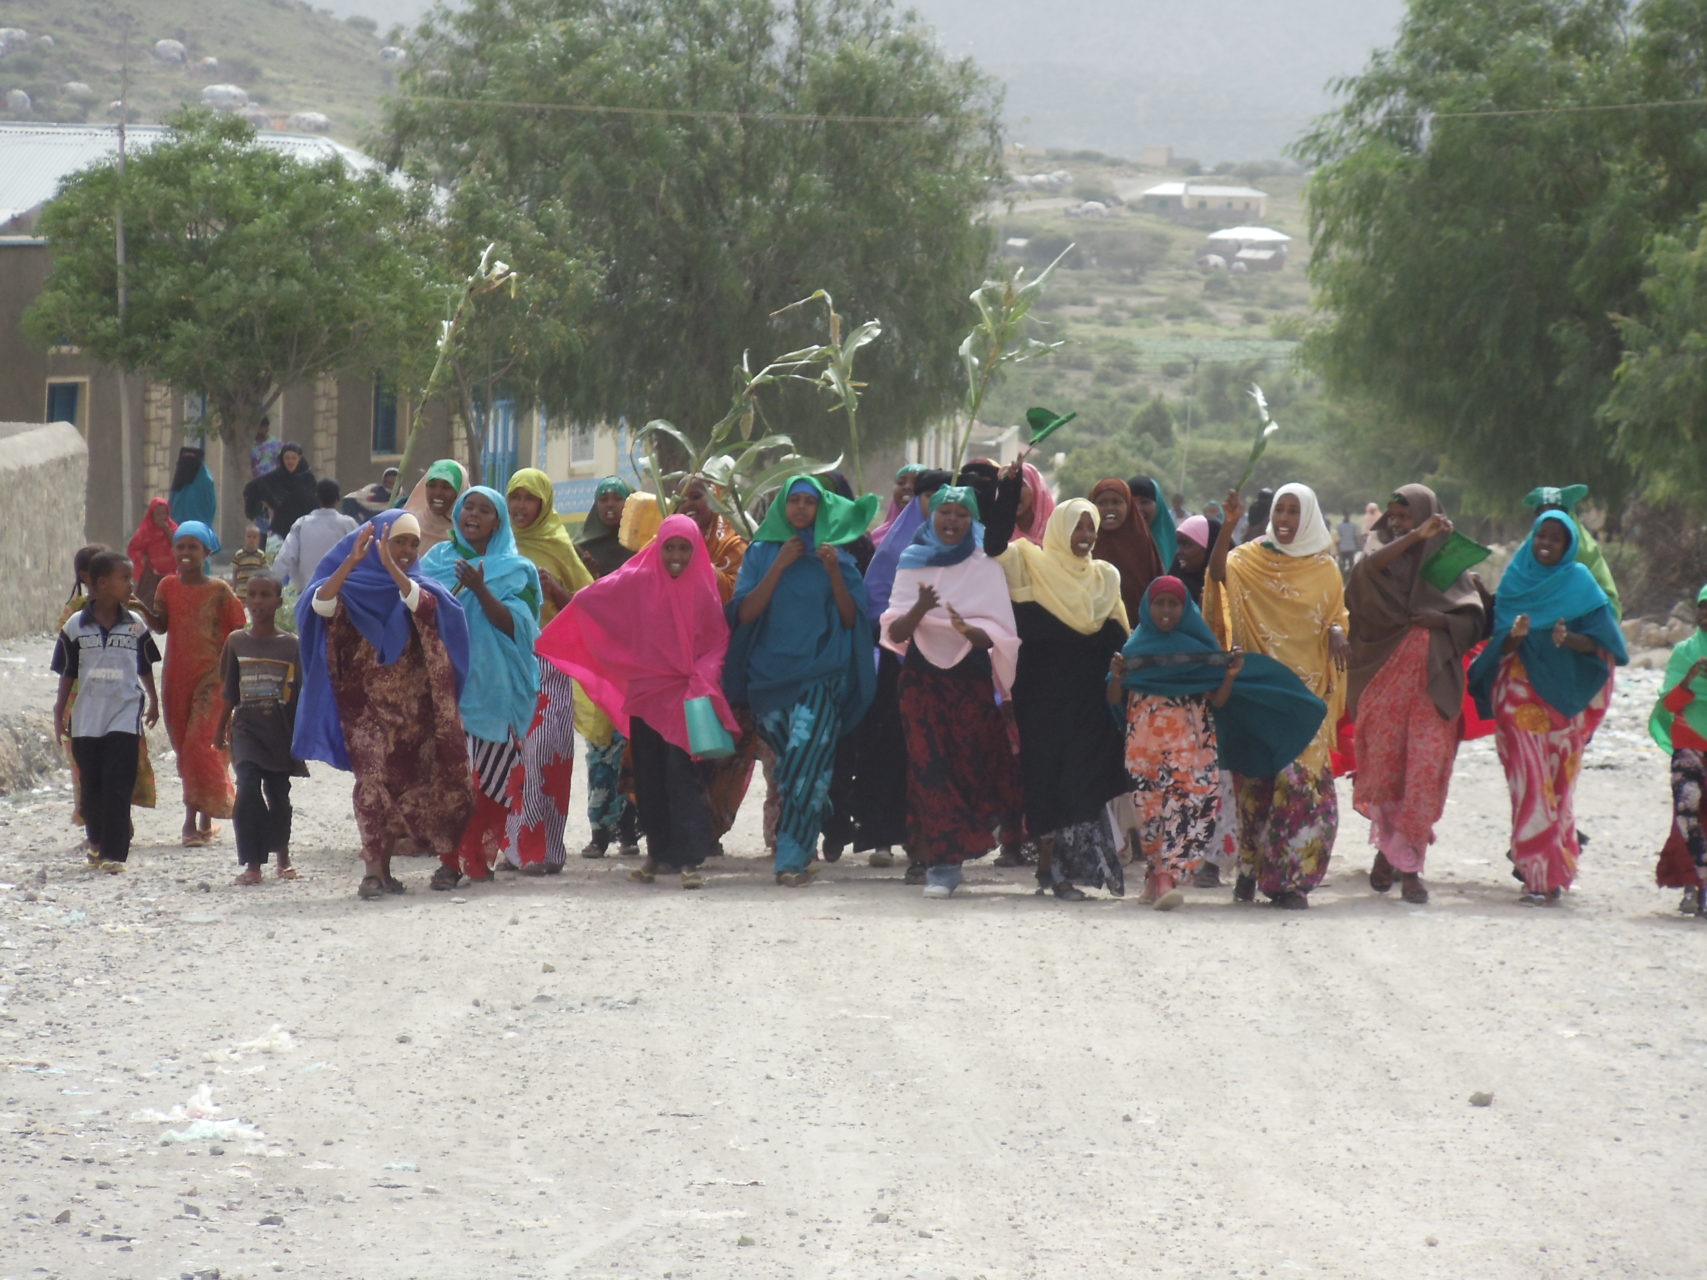 A group of women march happily down a dirt road